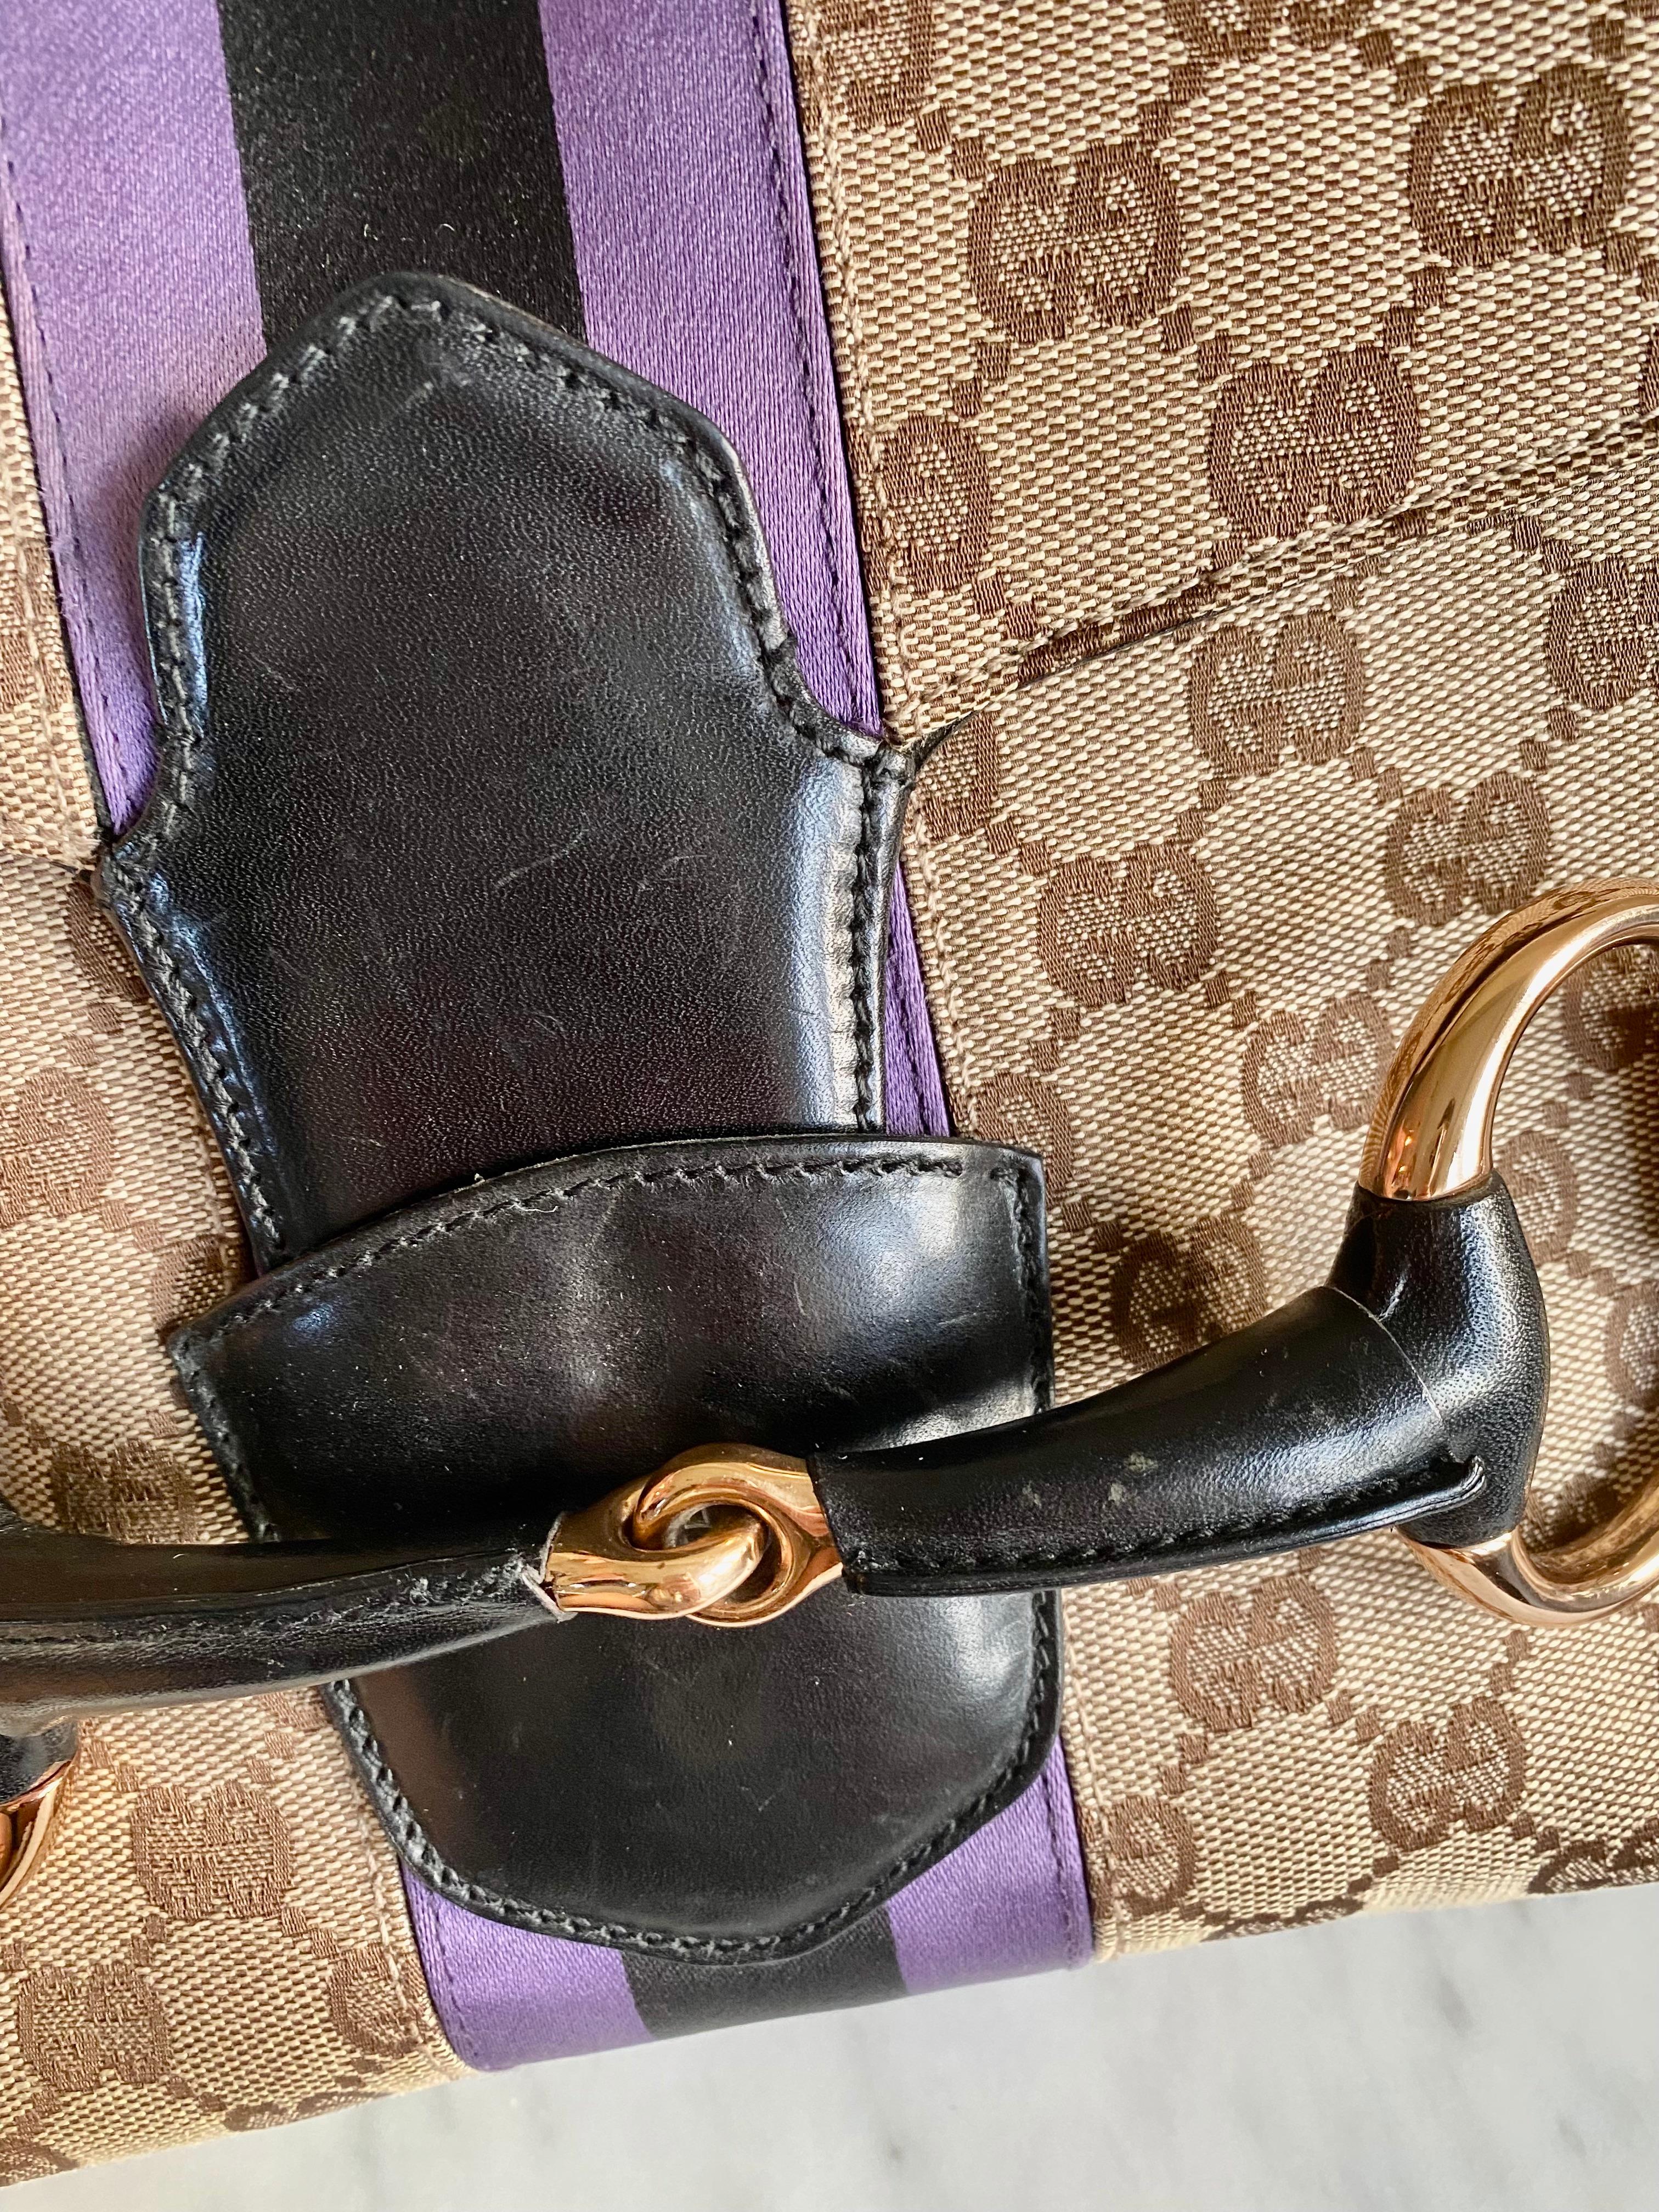 S/S 2004 Gucci by Tom Ford Tan GG Horsebit Shoulder Bag with Purple Satin Stripe In Good Condition In West Hollywood, CA